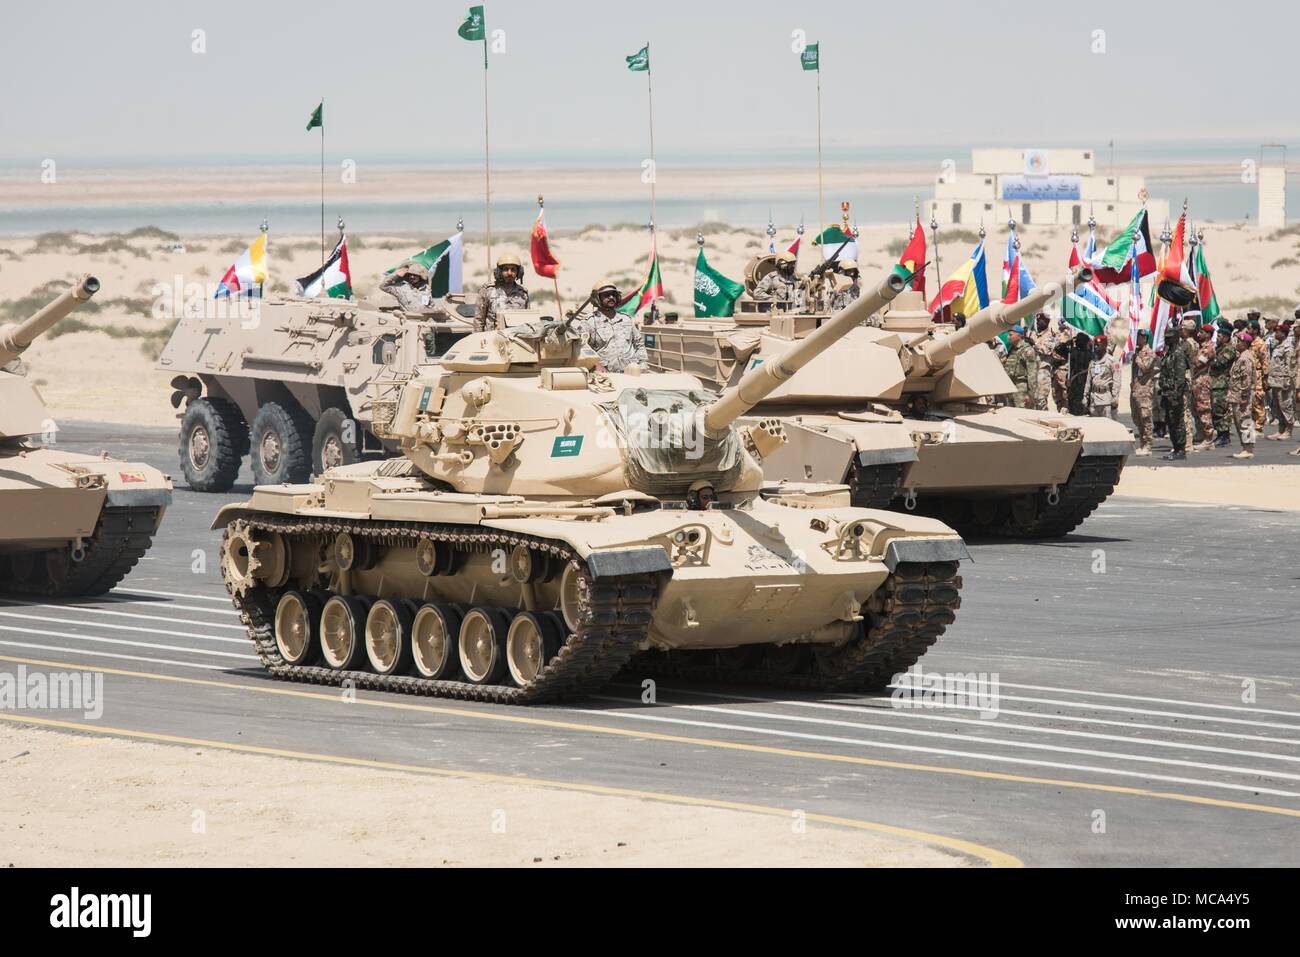 Jubail, Saudi Arabia, 14th Apr, 2018. Photo taken on April 14, 2018 shows armored vehicles during a ceremony show for the "Gulf Shield Joint Exercise-1" in eastern Saudi Arabia. Troops from 25 countries performed a live-ammunition drill in eastern Saudi Arabia on Saturday, one day before the 29th Arab League Summit. Credit: Meng Tao/Xinhua/Alamy Live News Stock Photo